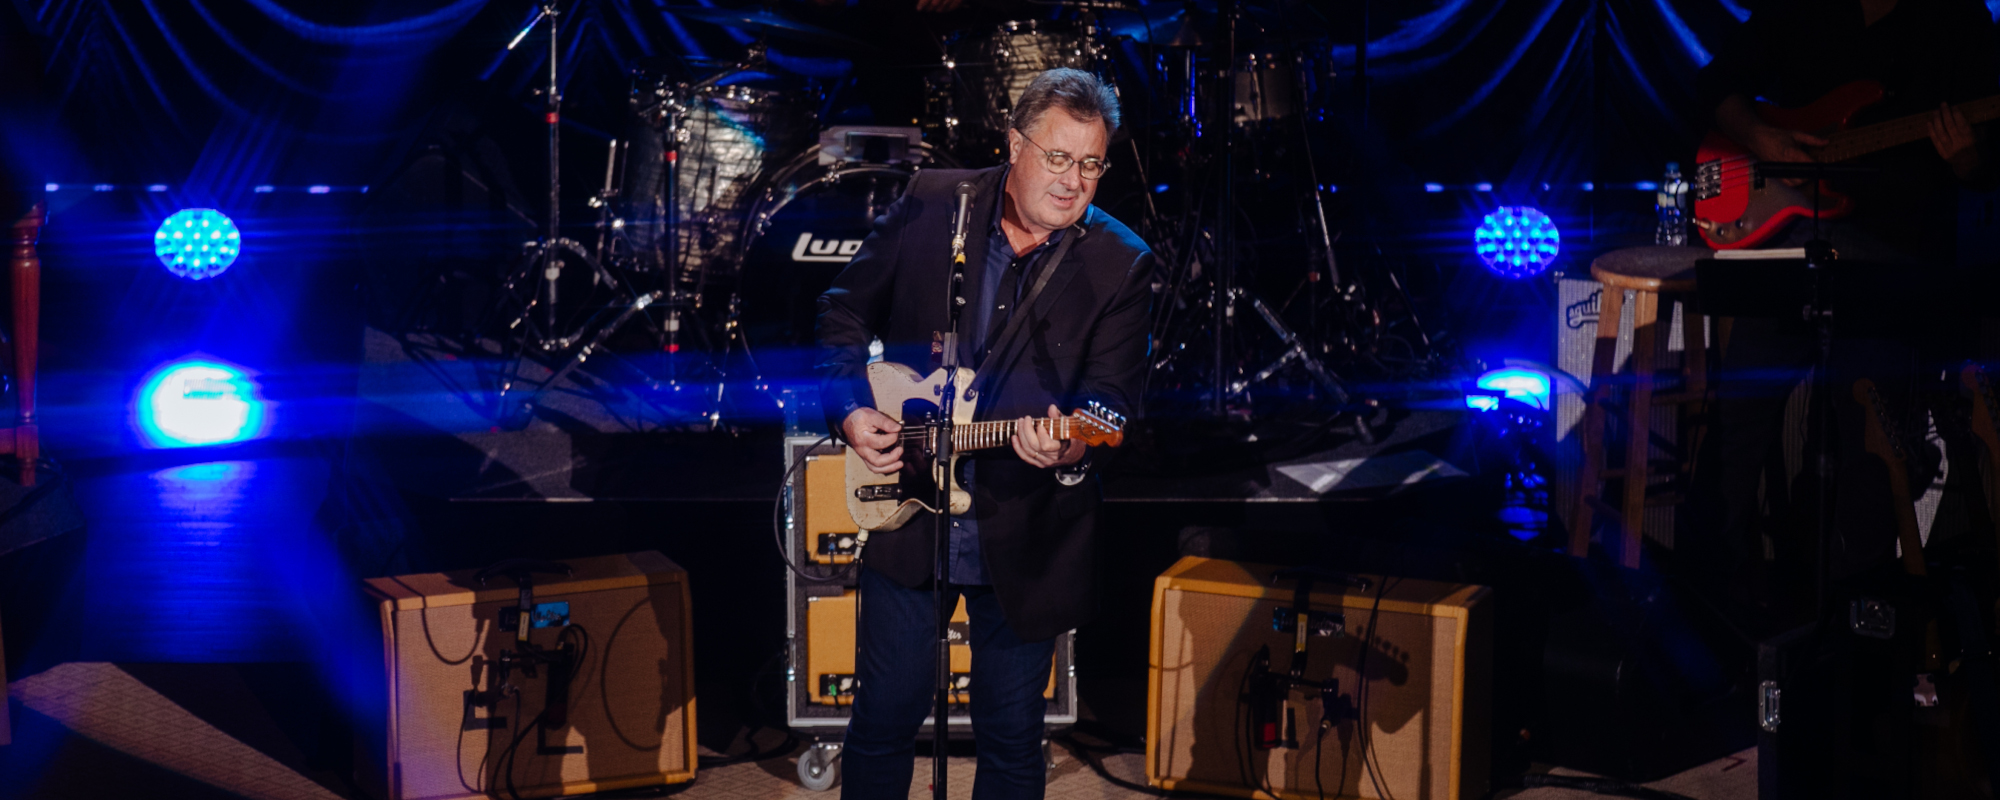 Vince Gill, Emmylou Harris to Honor Ryman Auditorium’s 130th Anniversary